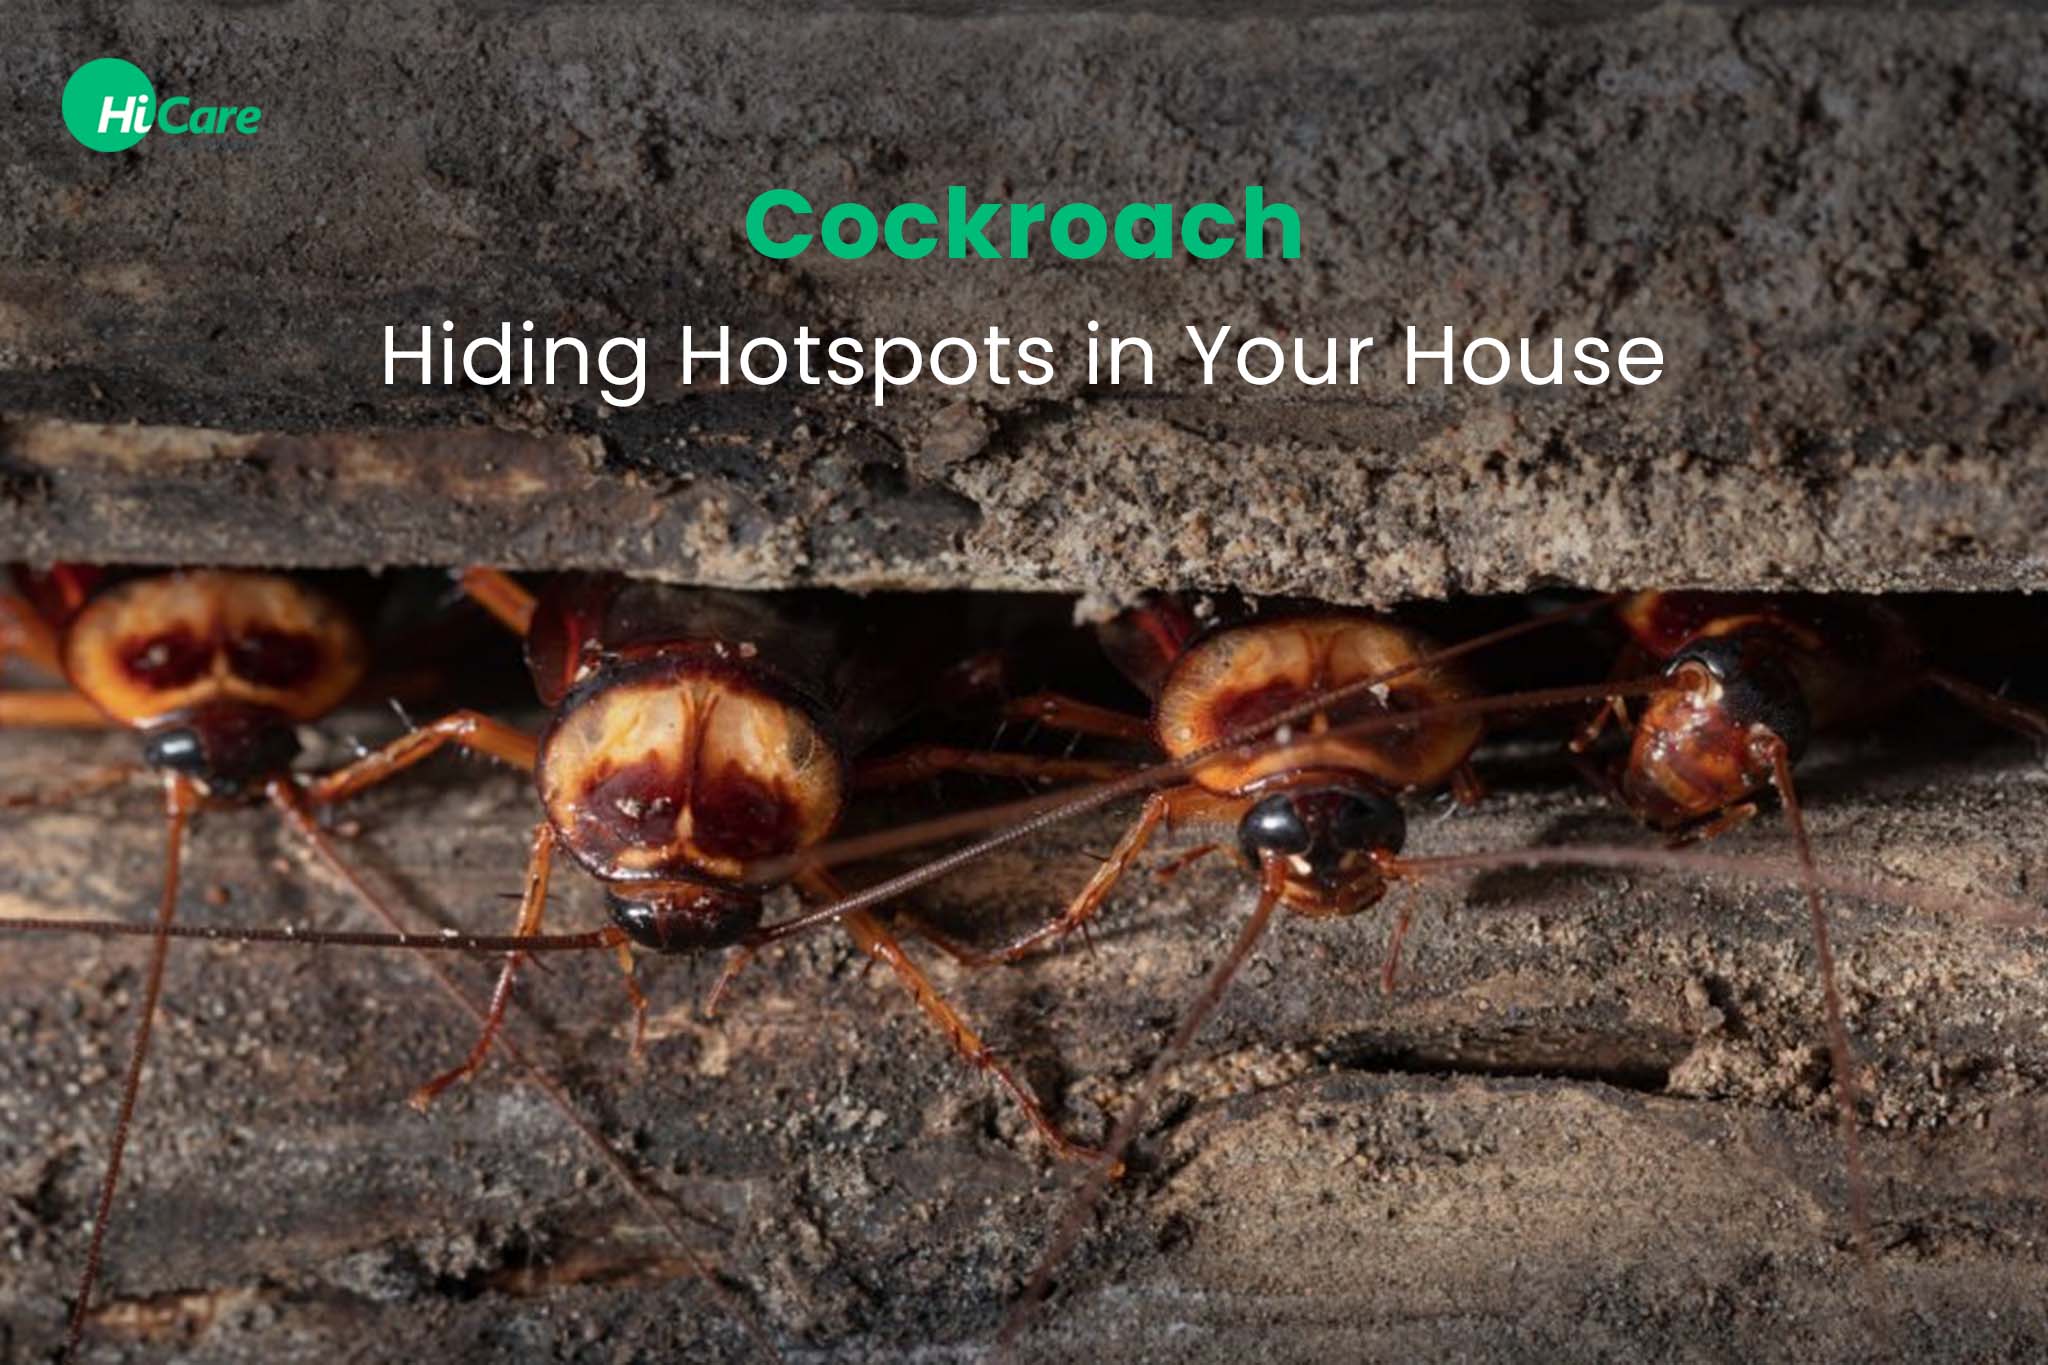 7 Cockroach Hiding Hotspots in Your House